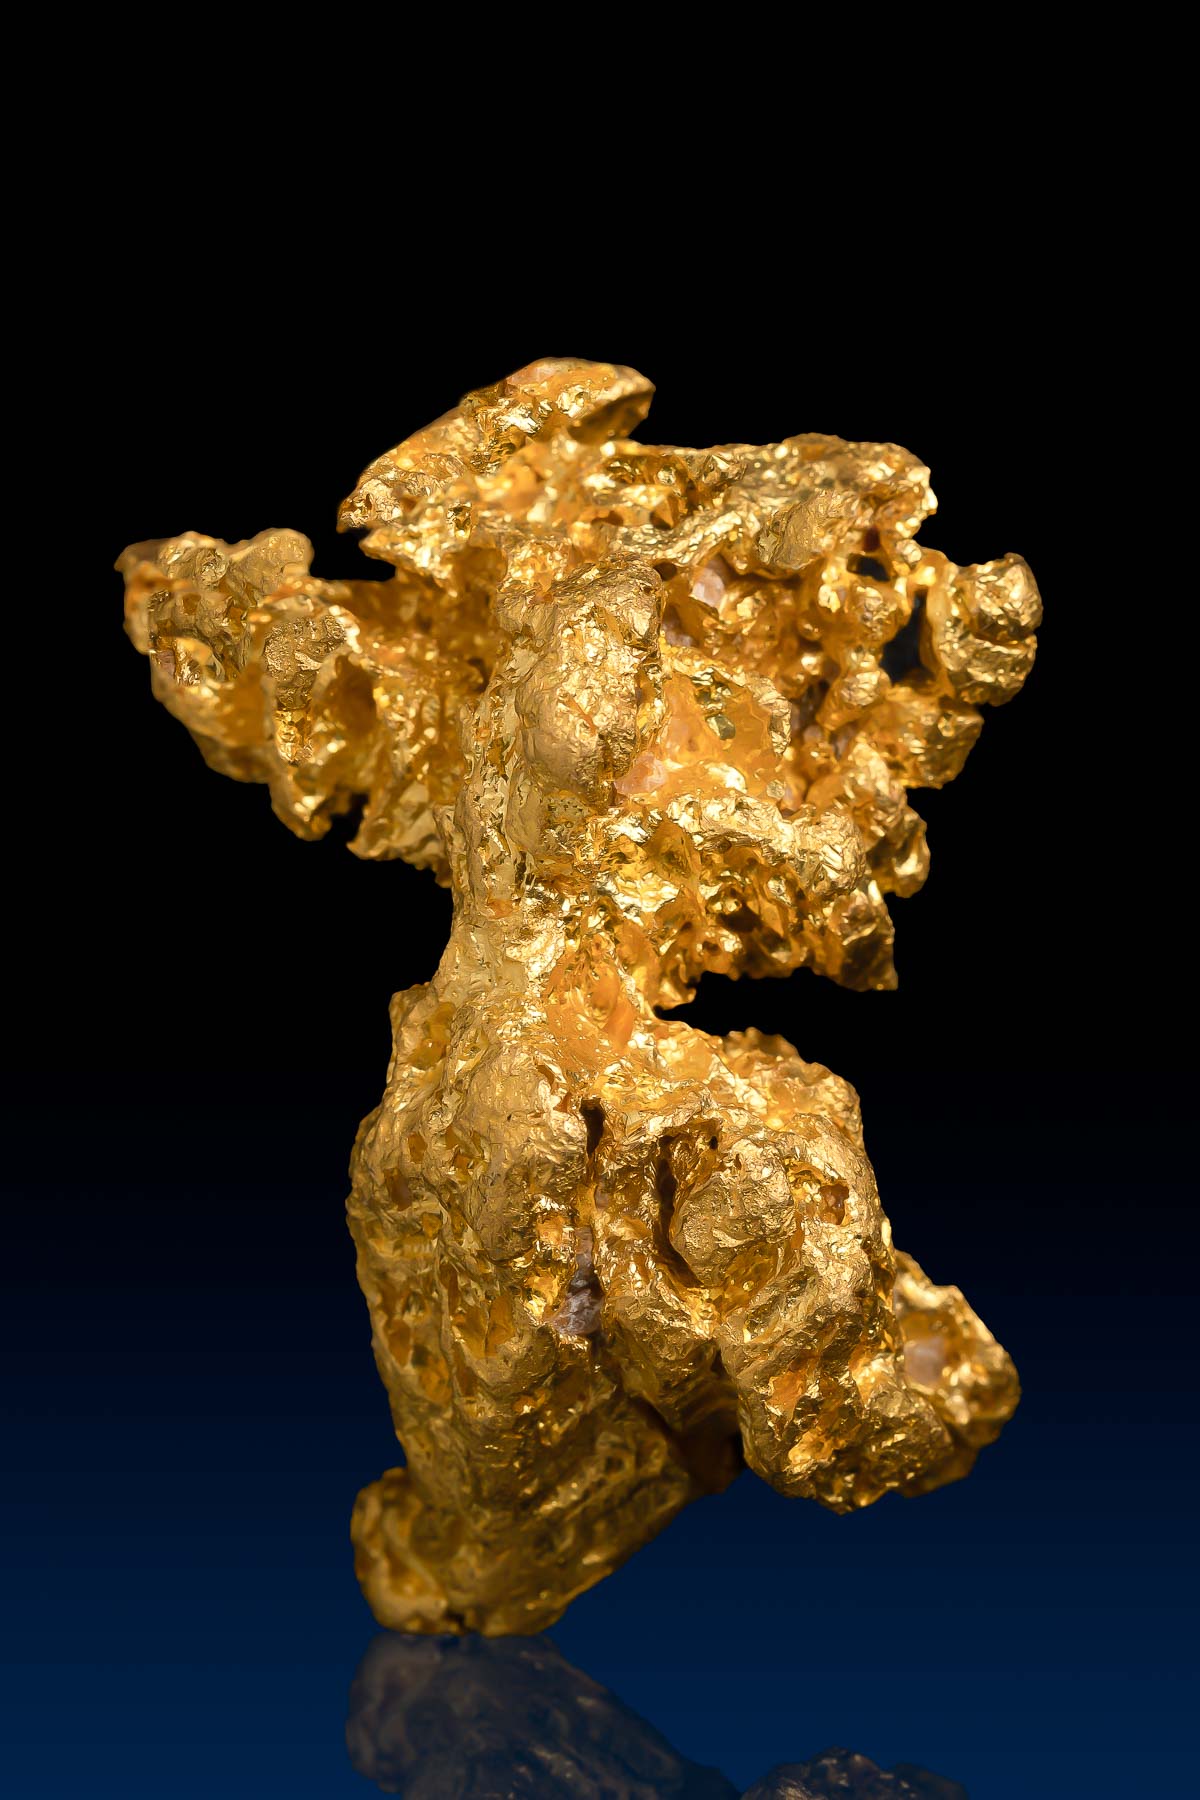 Brilliant and Unique Form - Natural Gold Nugget from Brazil